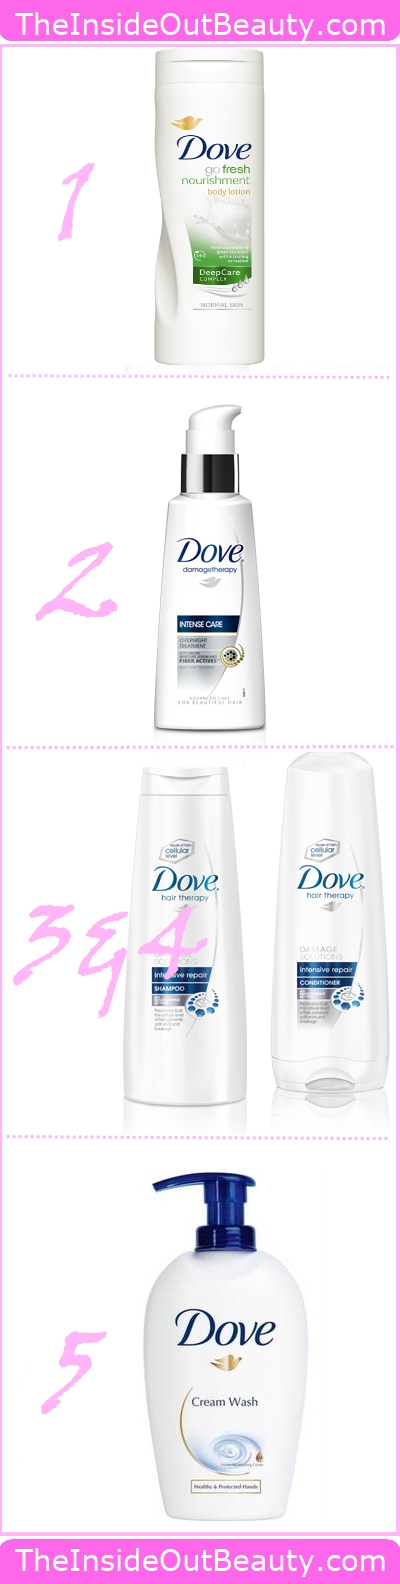 Dove Facial Products Hershey Shoes Coupon